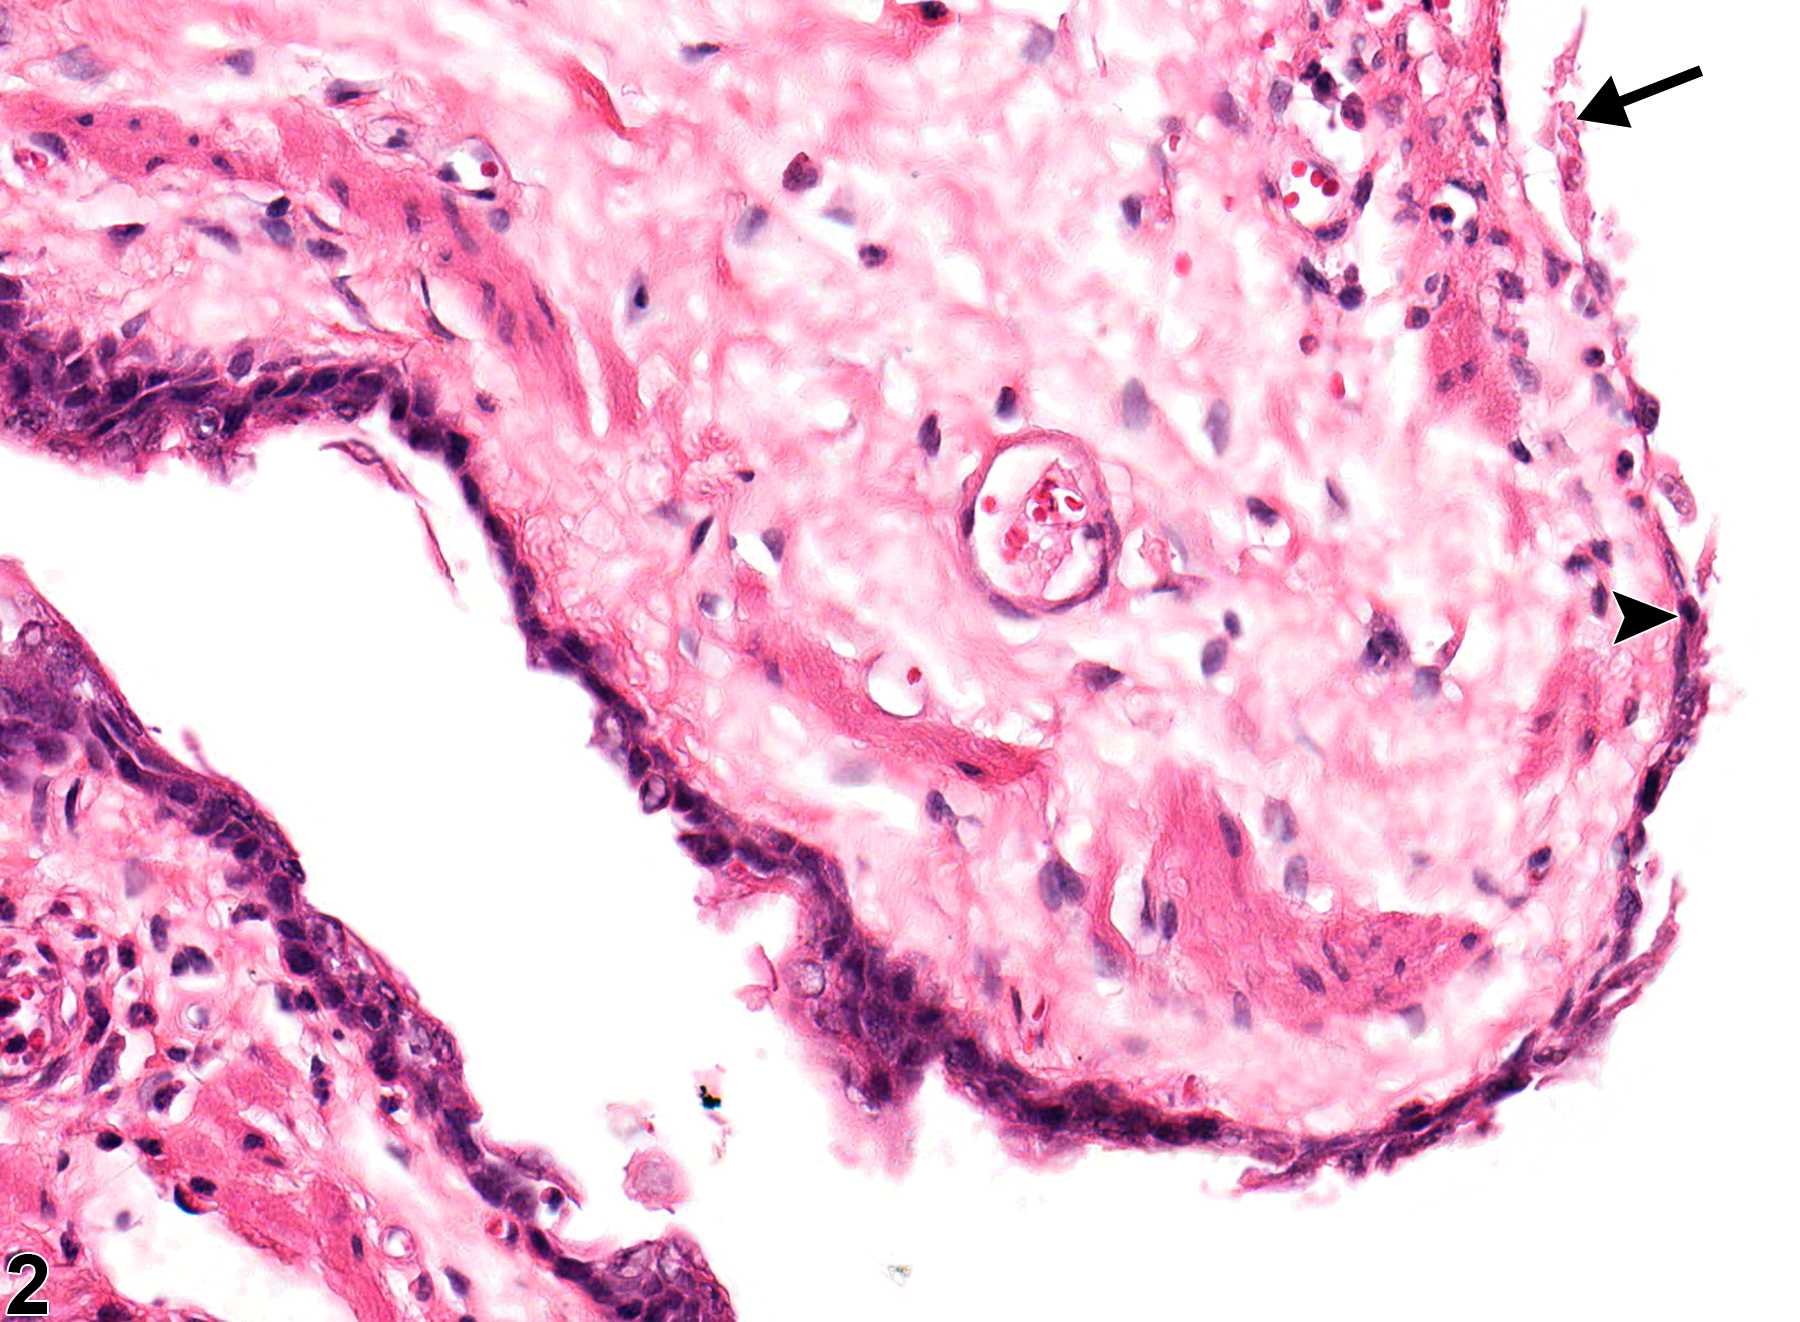 Image of ulcer in the esophagus from a female F344/N rat in a chronic study